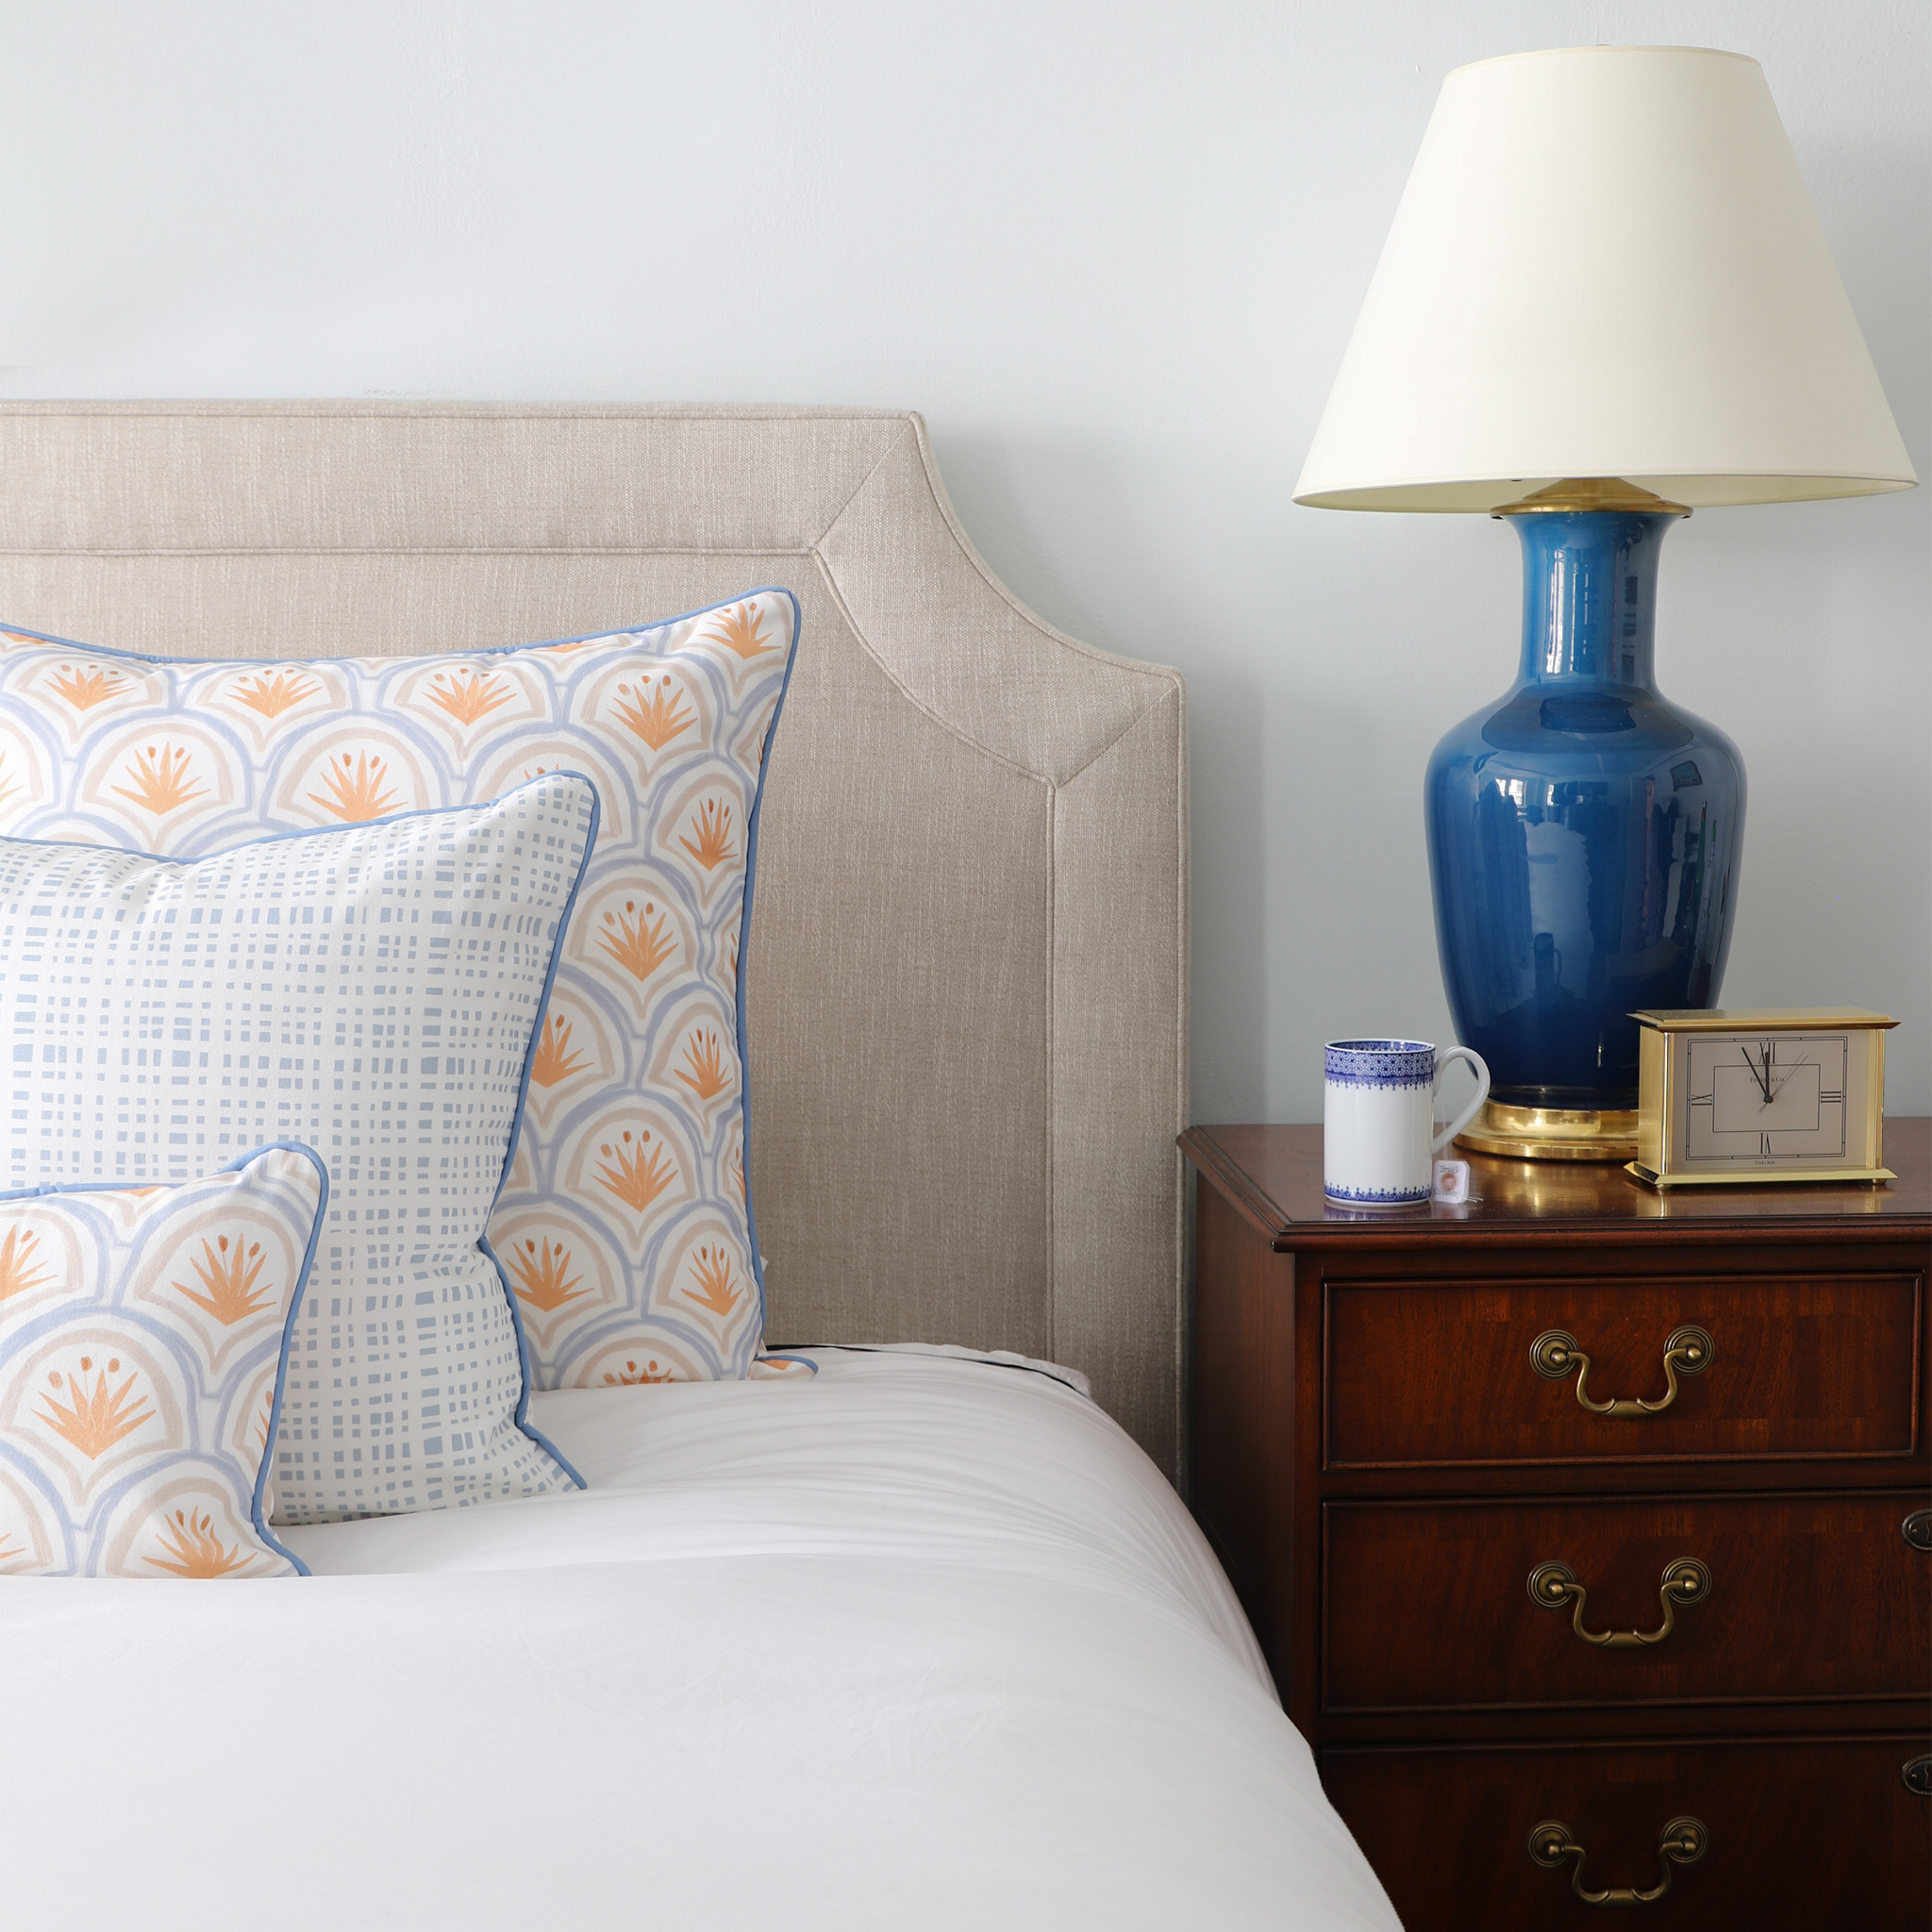 White bed close-up styled with Art Deco Palm Pattern Printed Pillow, Sky Blue Gingham Printed Pillow, and Sky Blue Gingham Printed Lumbar next to wooden nightstand with blue and white lamp on top by golden clock and tea cup